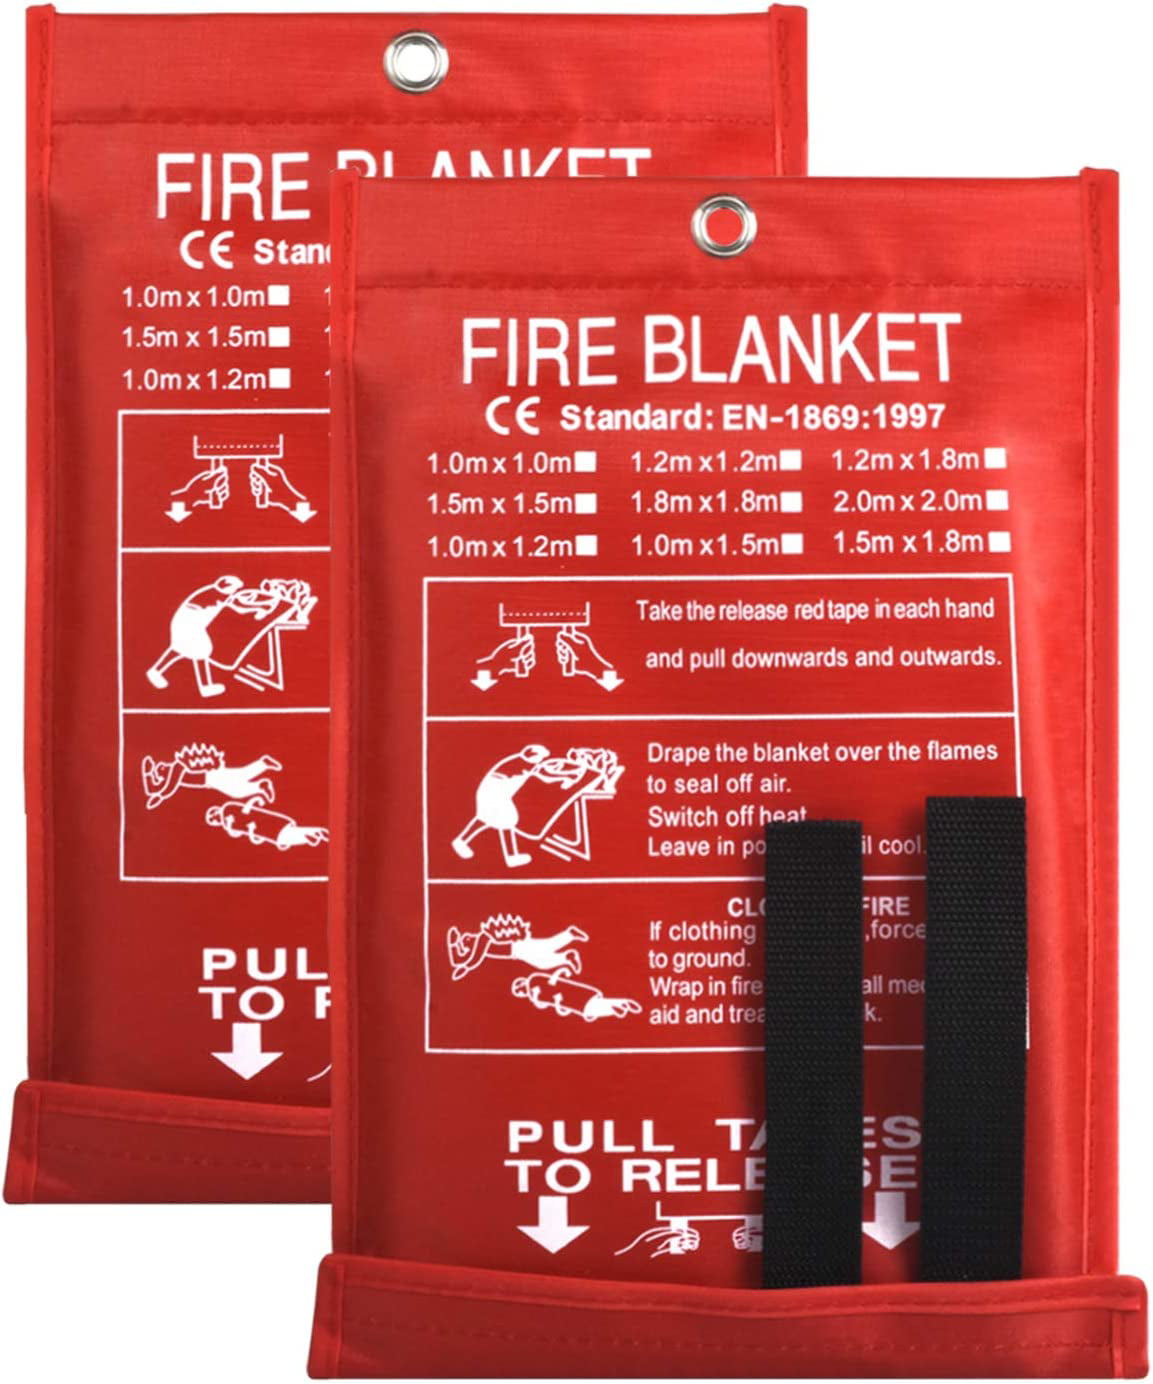 fire Places Fire Suppression for Kitchen Cars Schools Emergency fire Blankets.Flame Retardant Safety Blanket 2 Pack with Free Hangers Emergency Fire Blankets 